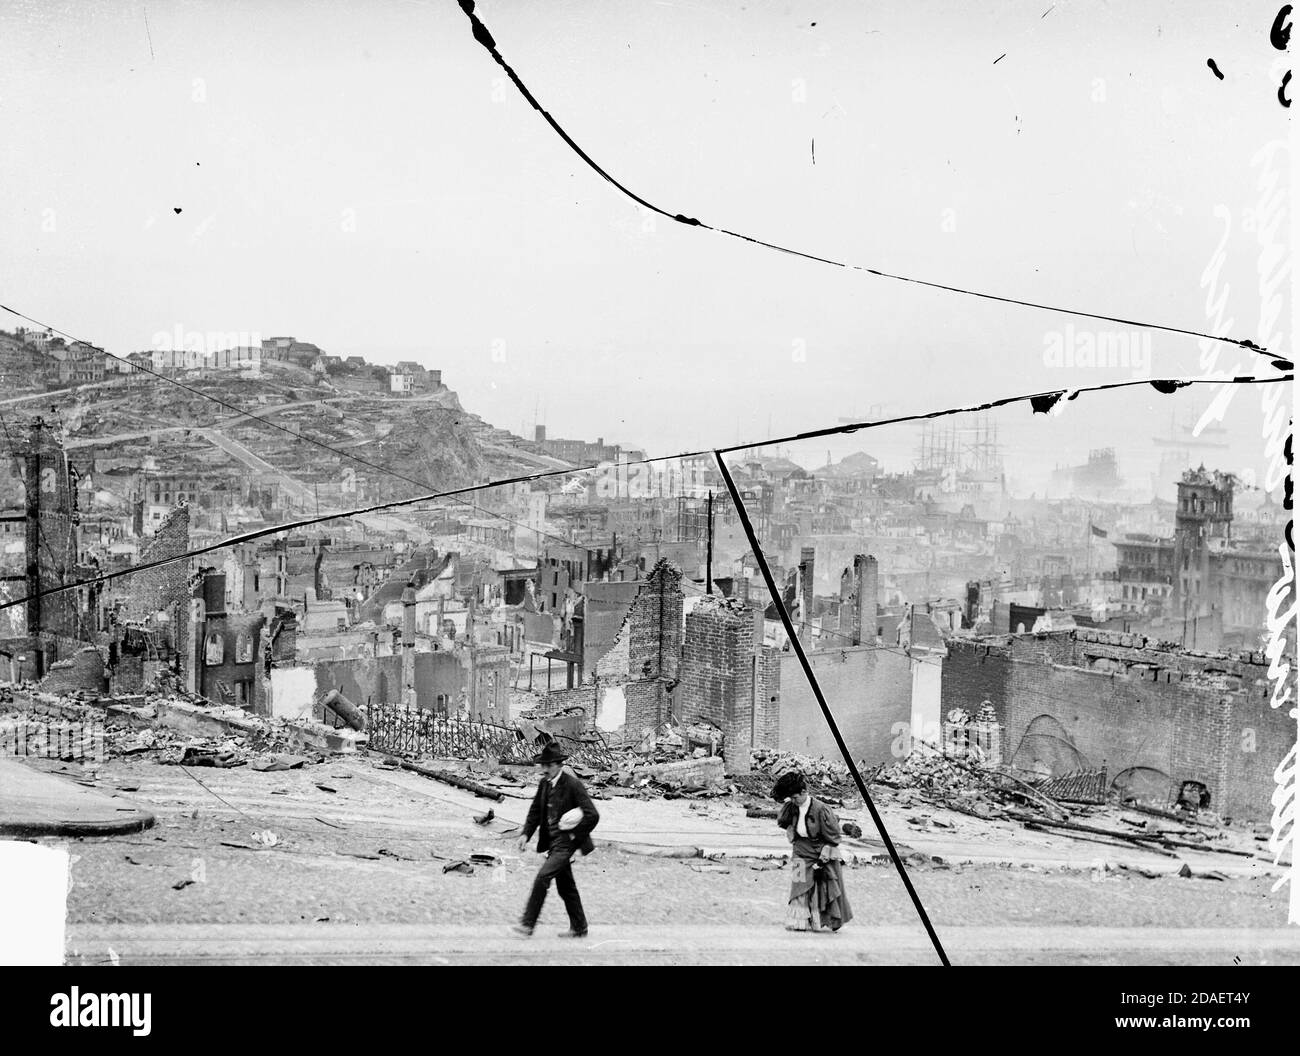 Cityscape view looking down on the building ruins of Chinatown in San Francisco following the 1906 earthquake. Stock Photo